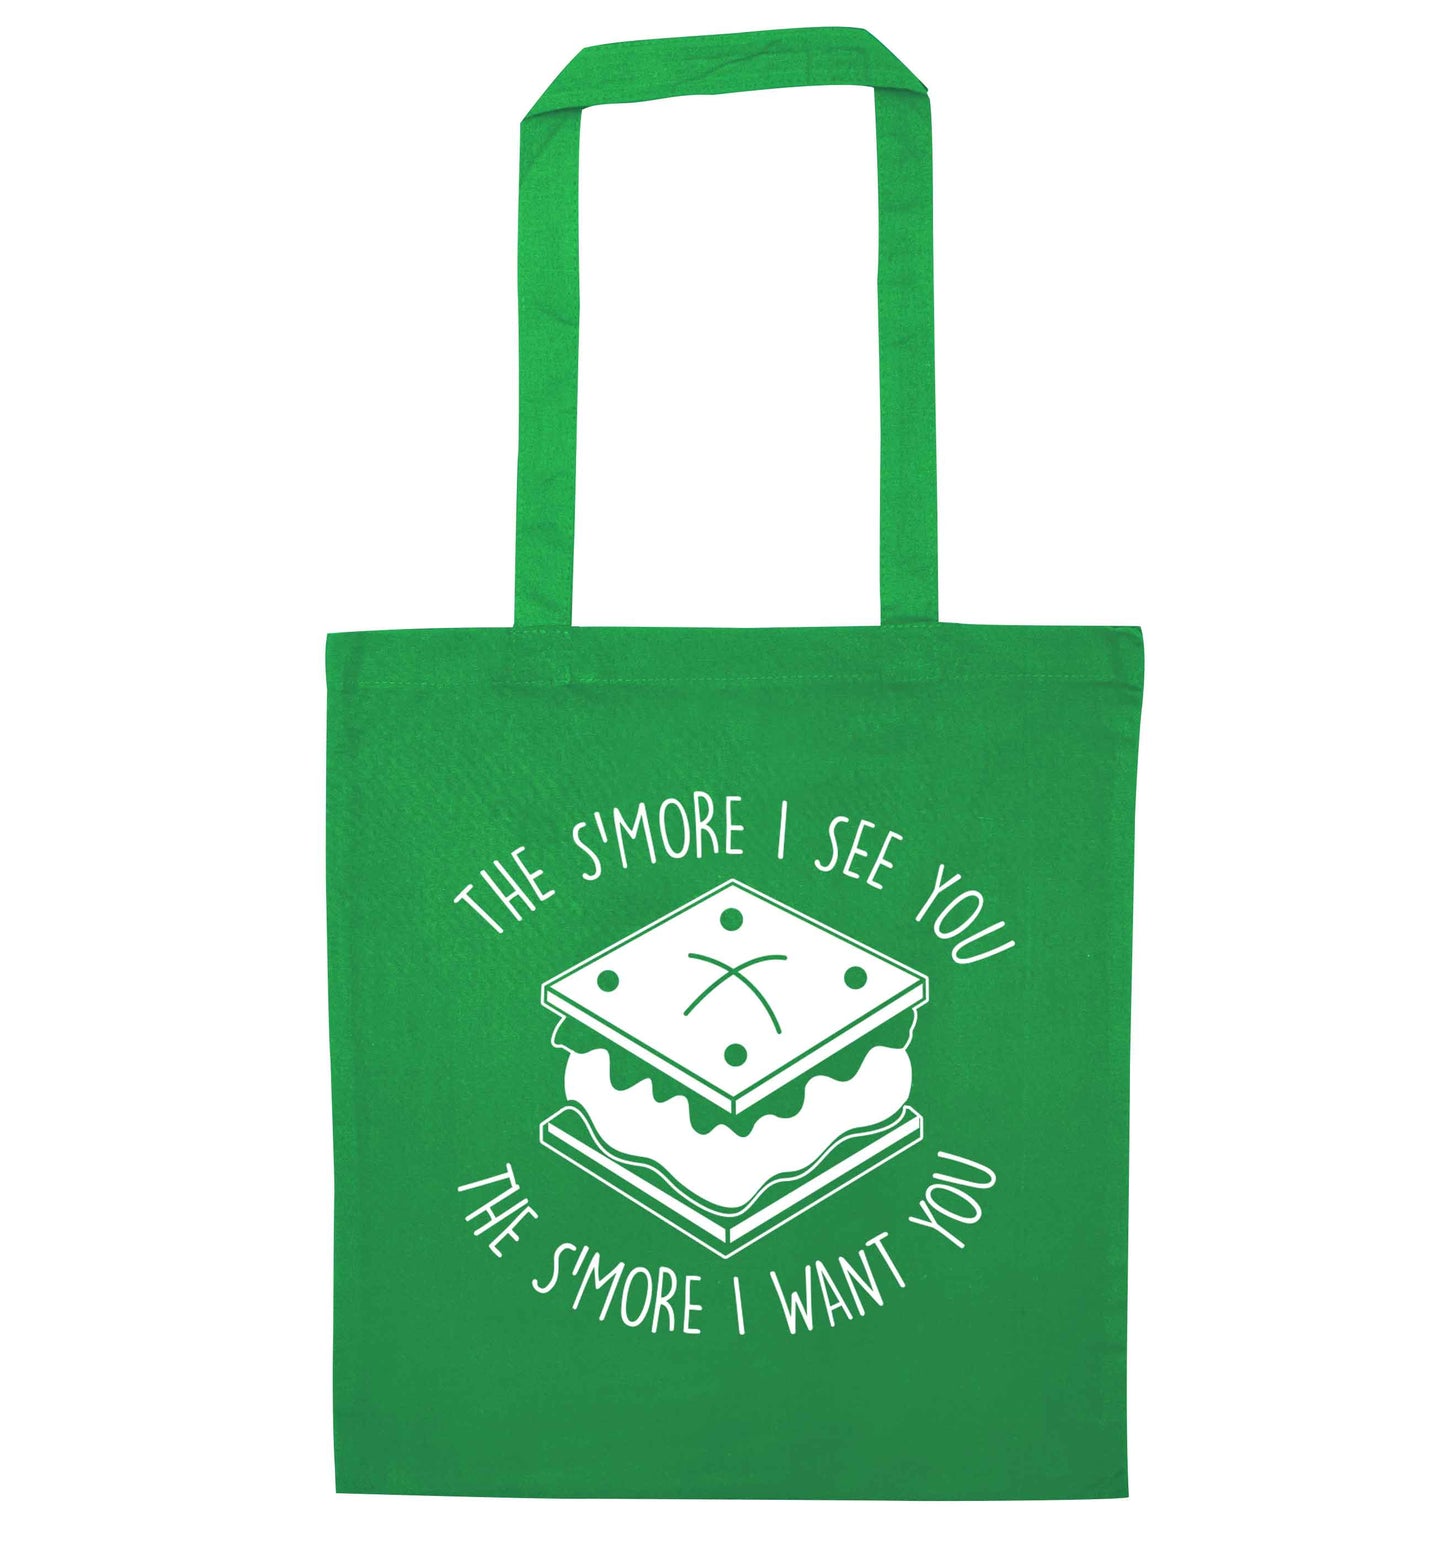 The s'more I see you the s'more I want you green tote bag